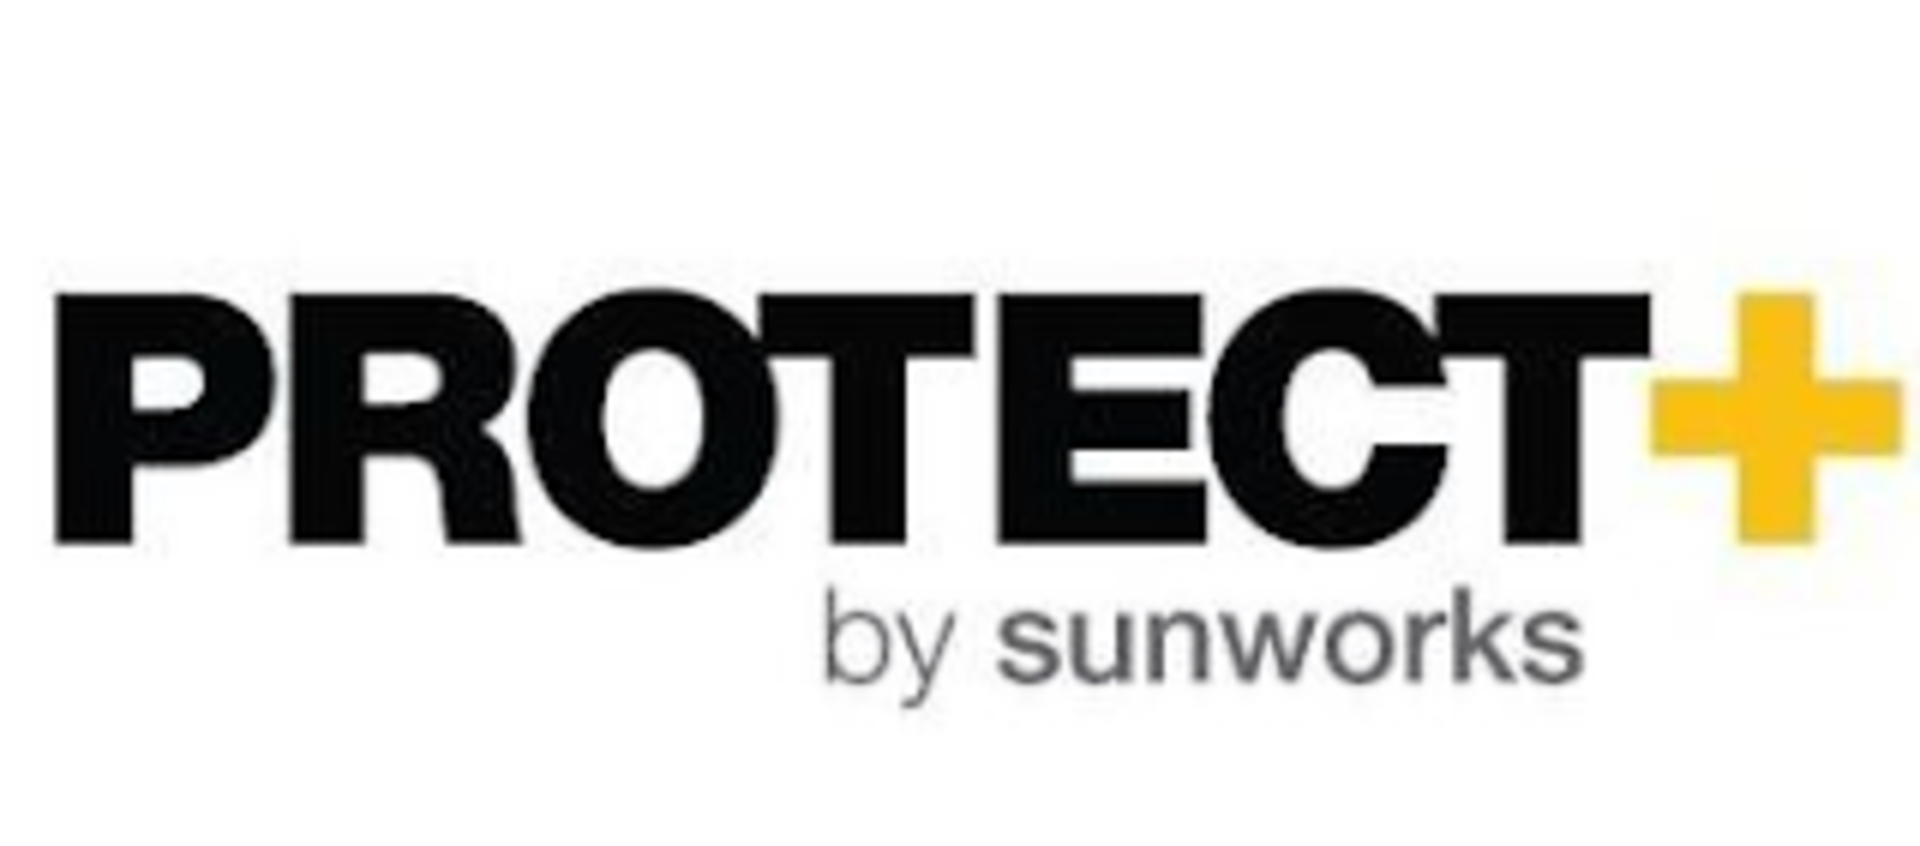 "PROTECT + by sunworks" (IP-Intellectual